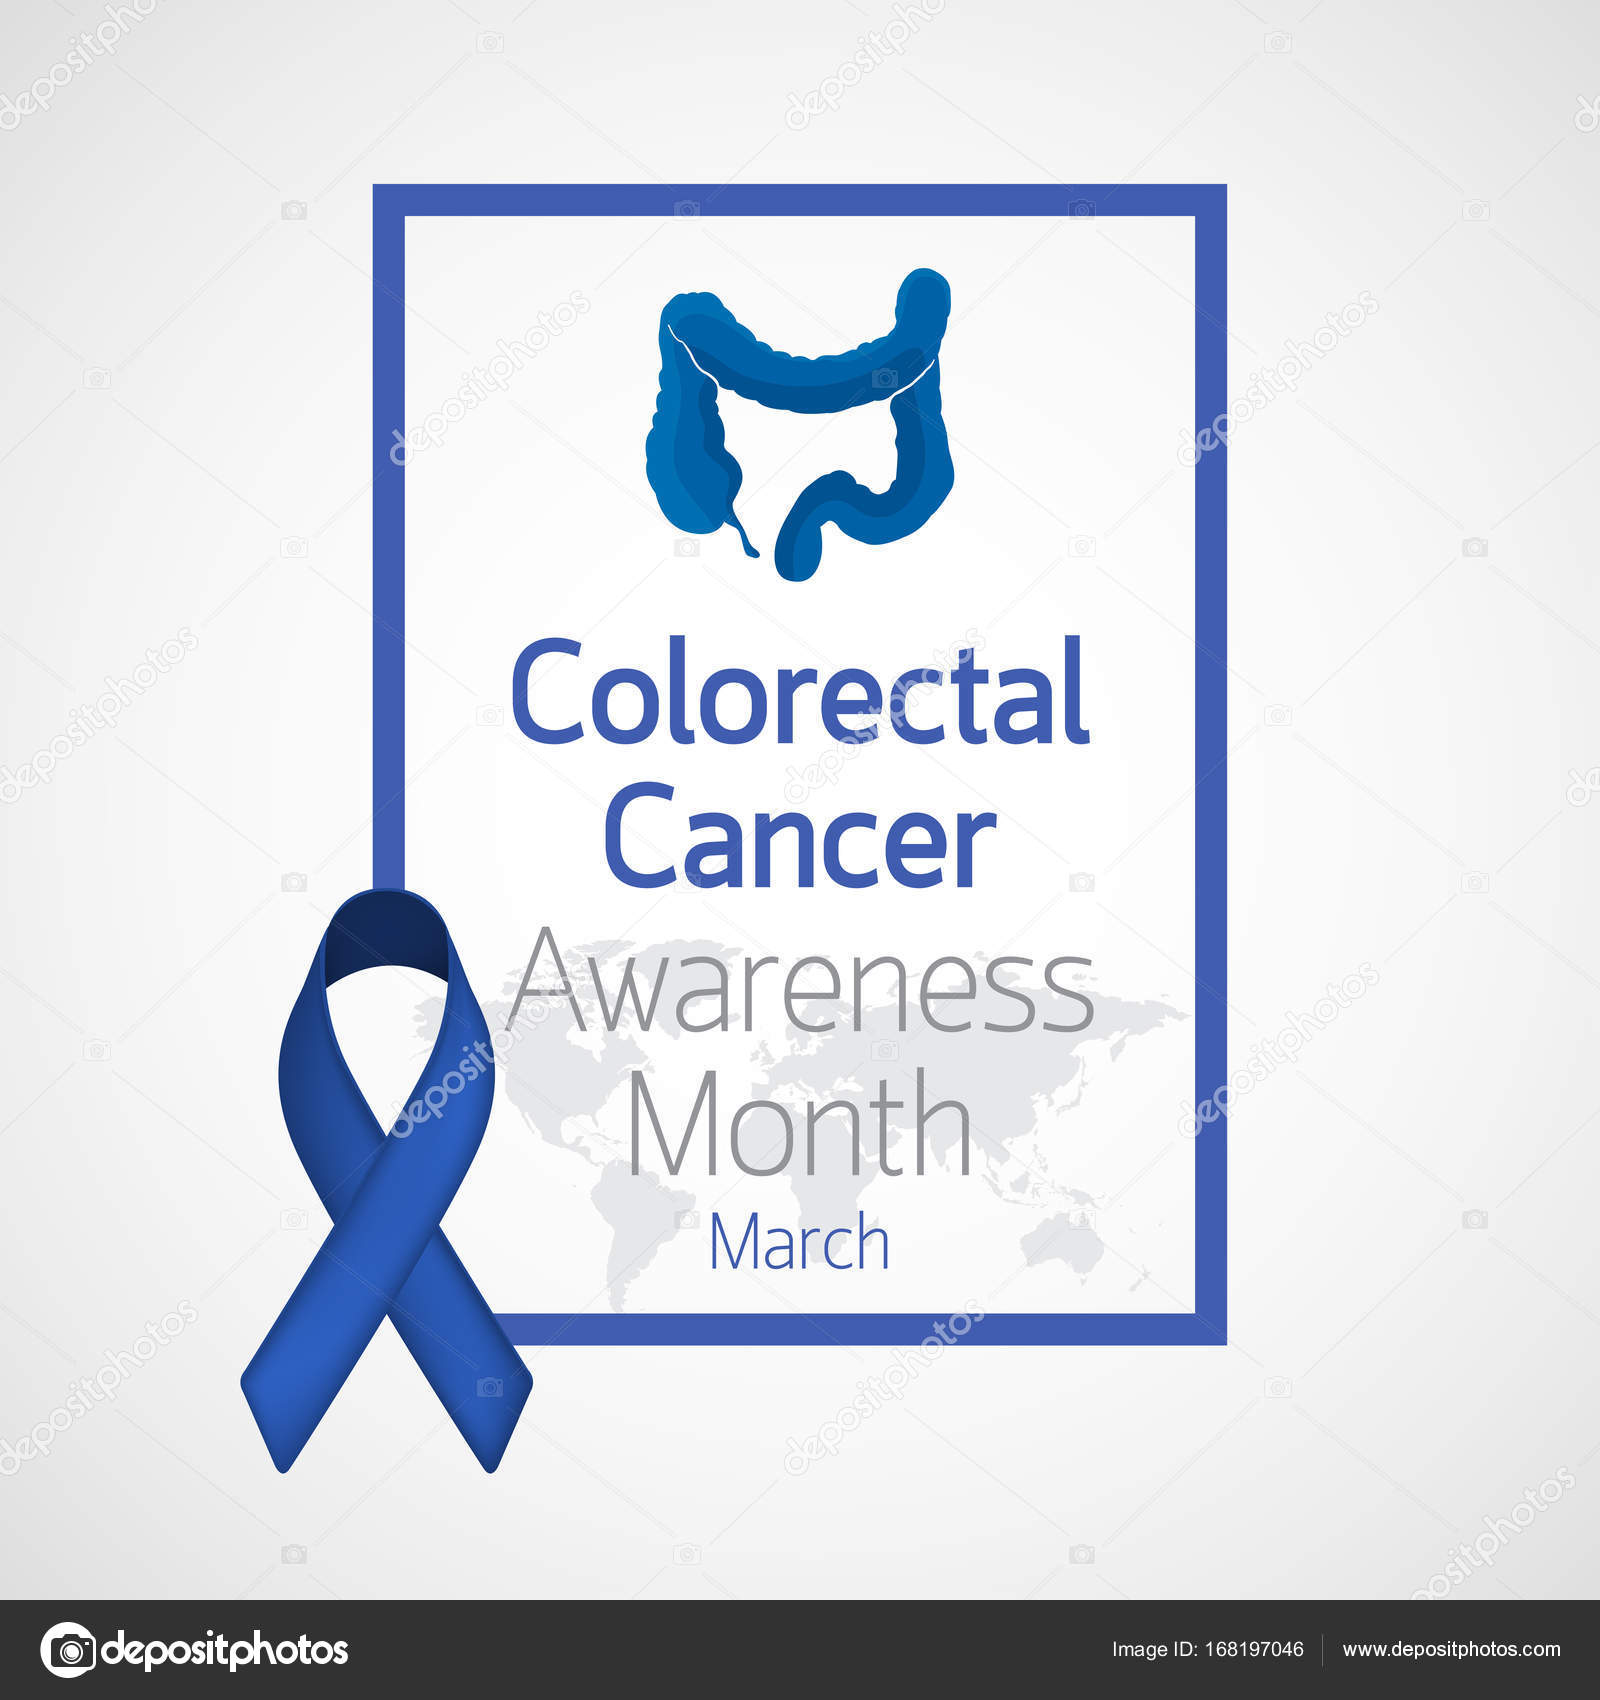 Colorectal Cancer Awareness Month Vector Icon Illustration Stock Vector